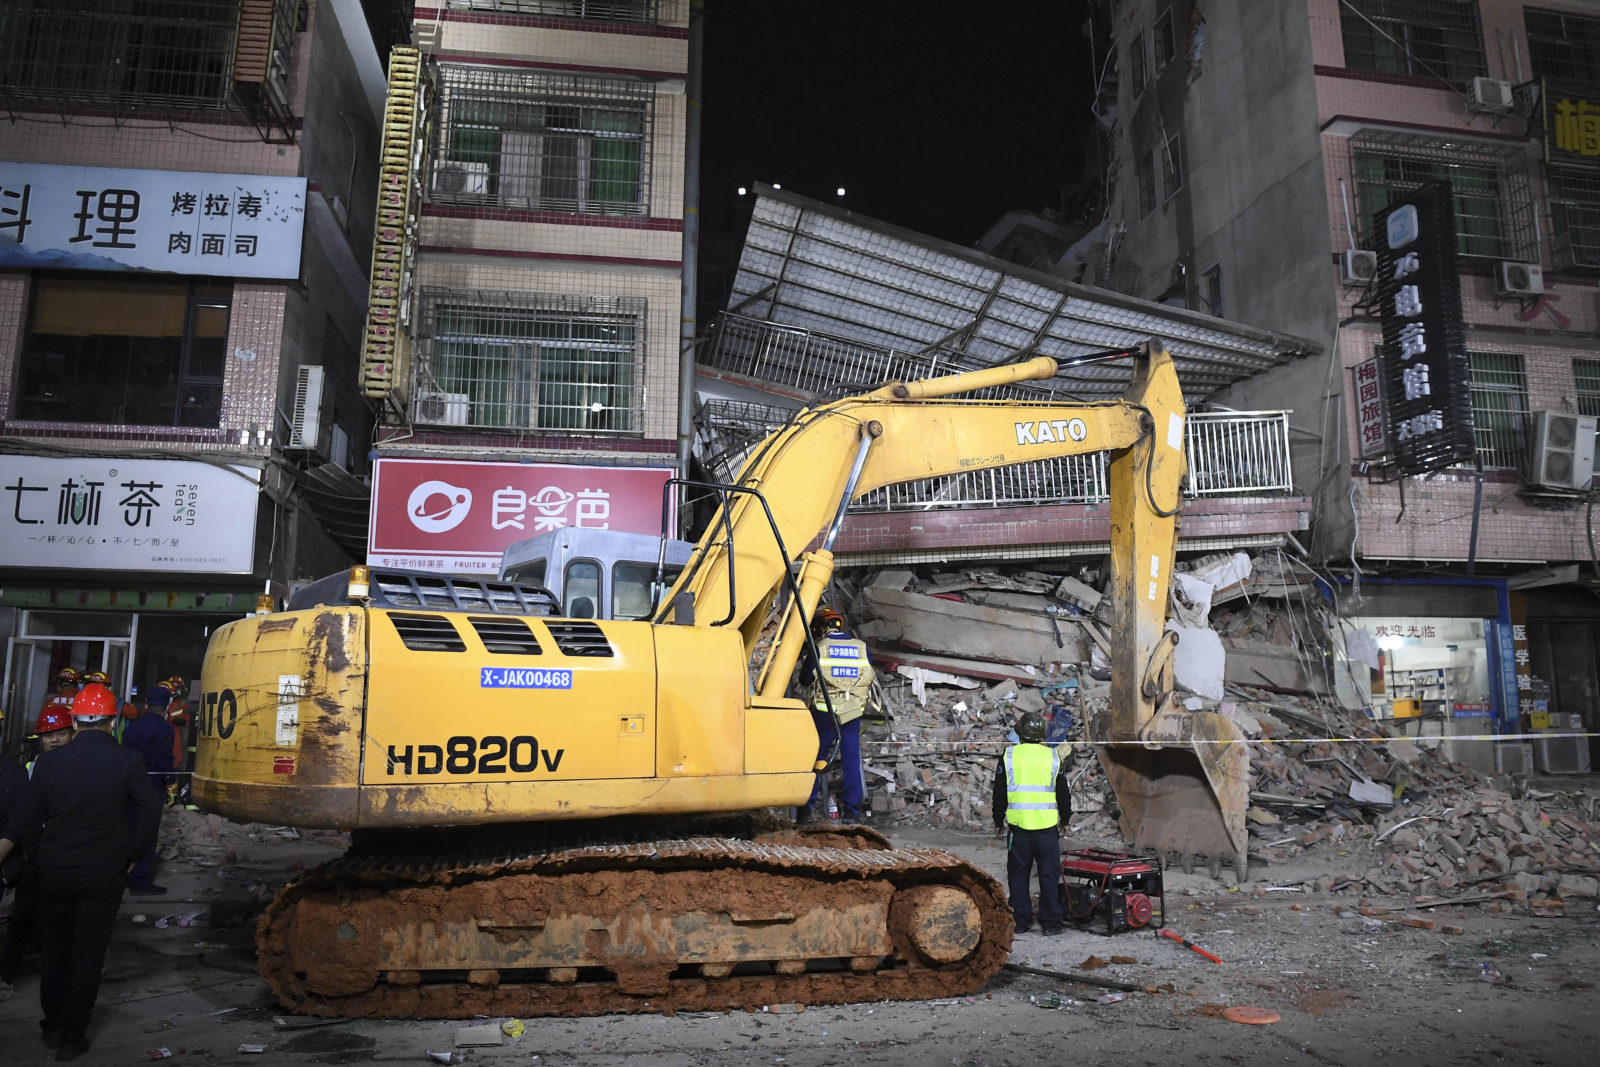 More than 20 trapped, others missing after China building collapse | èxtra